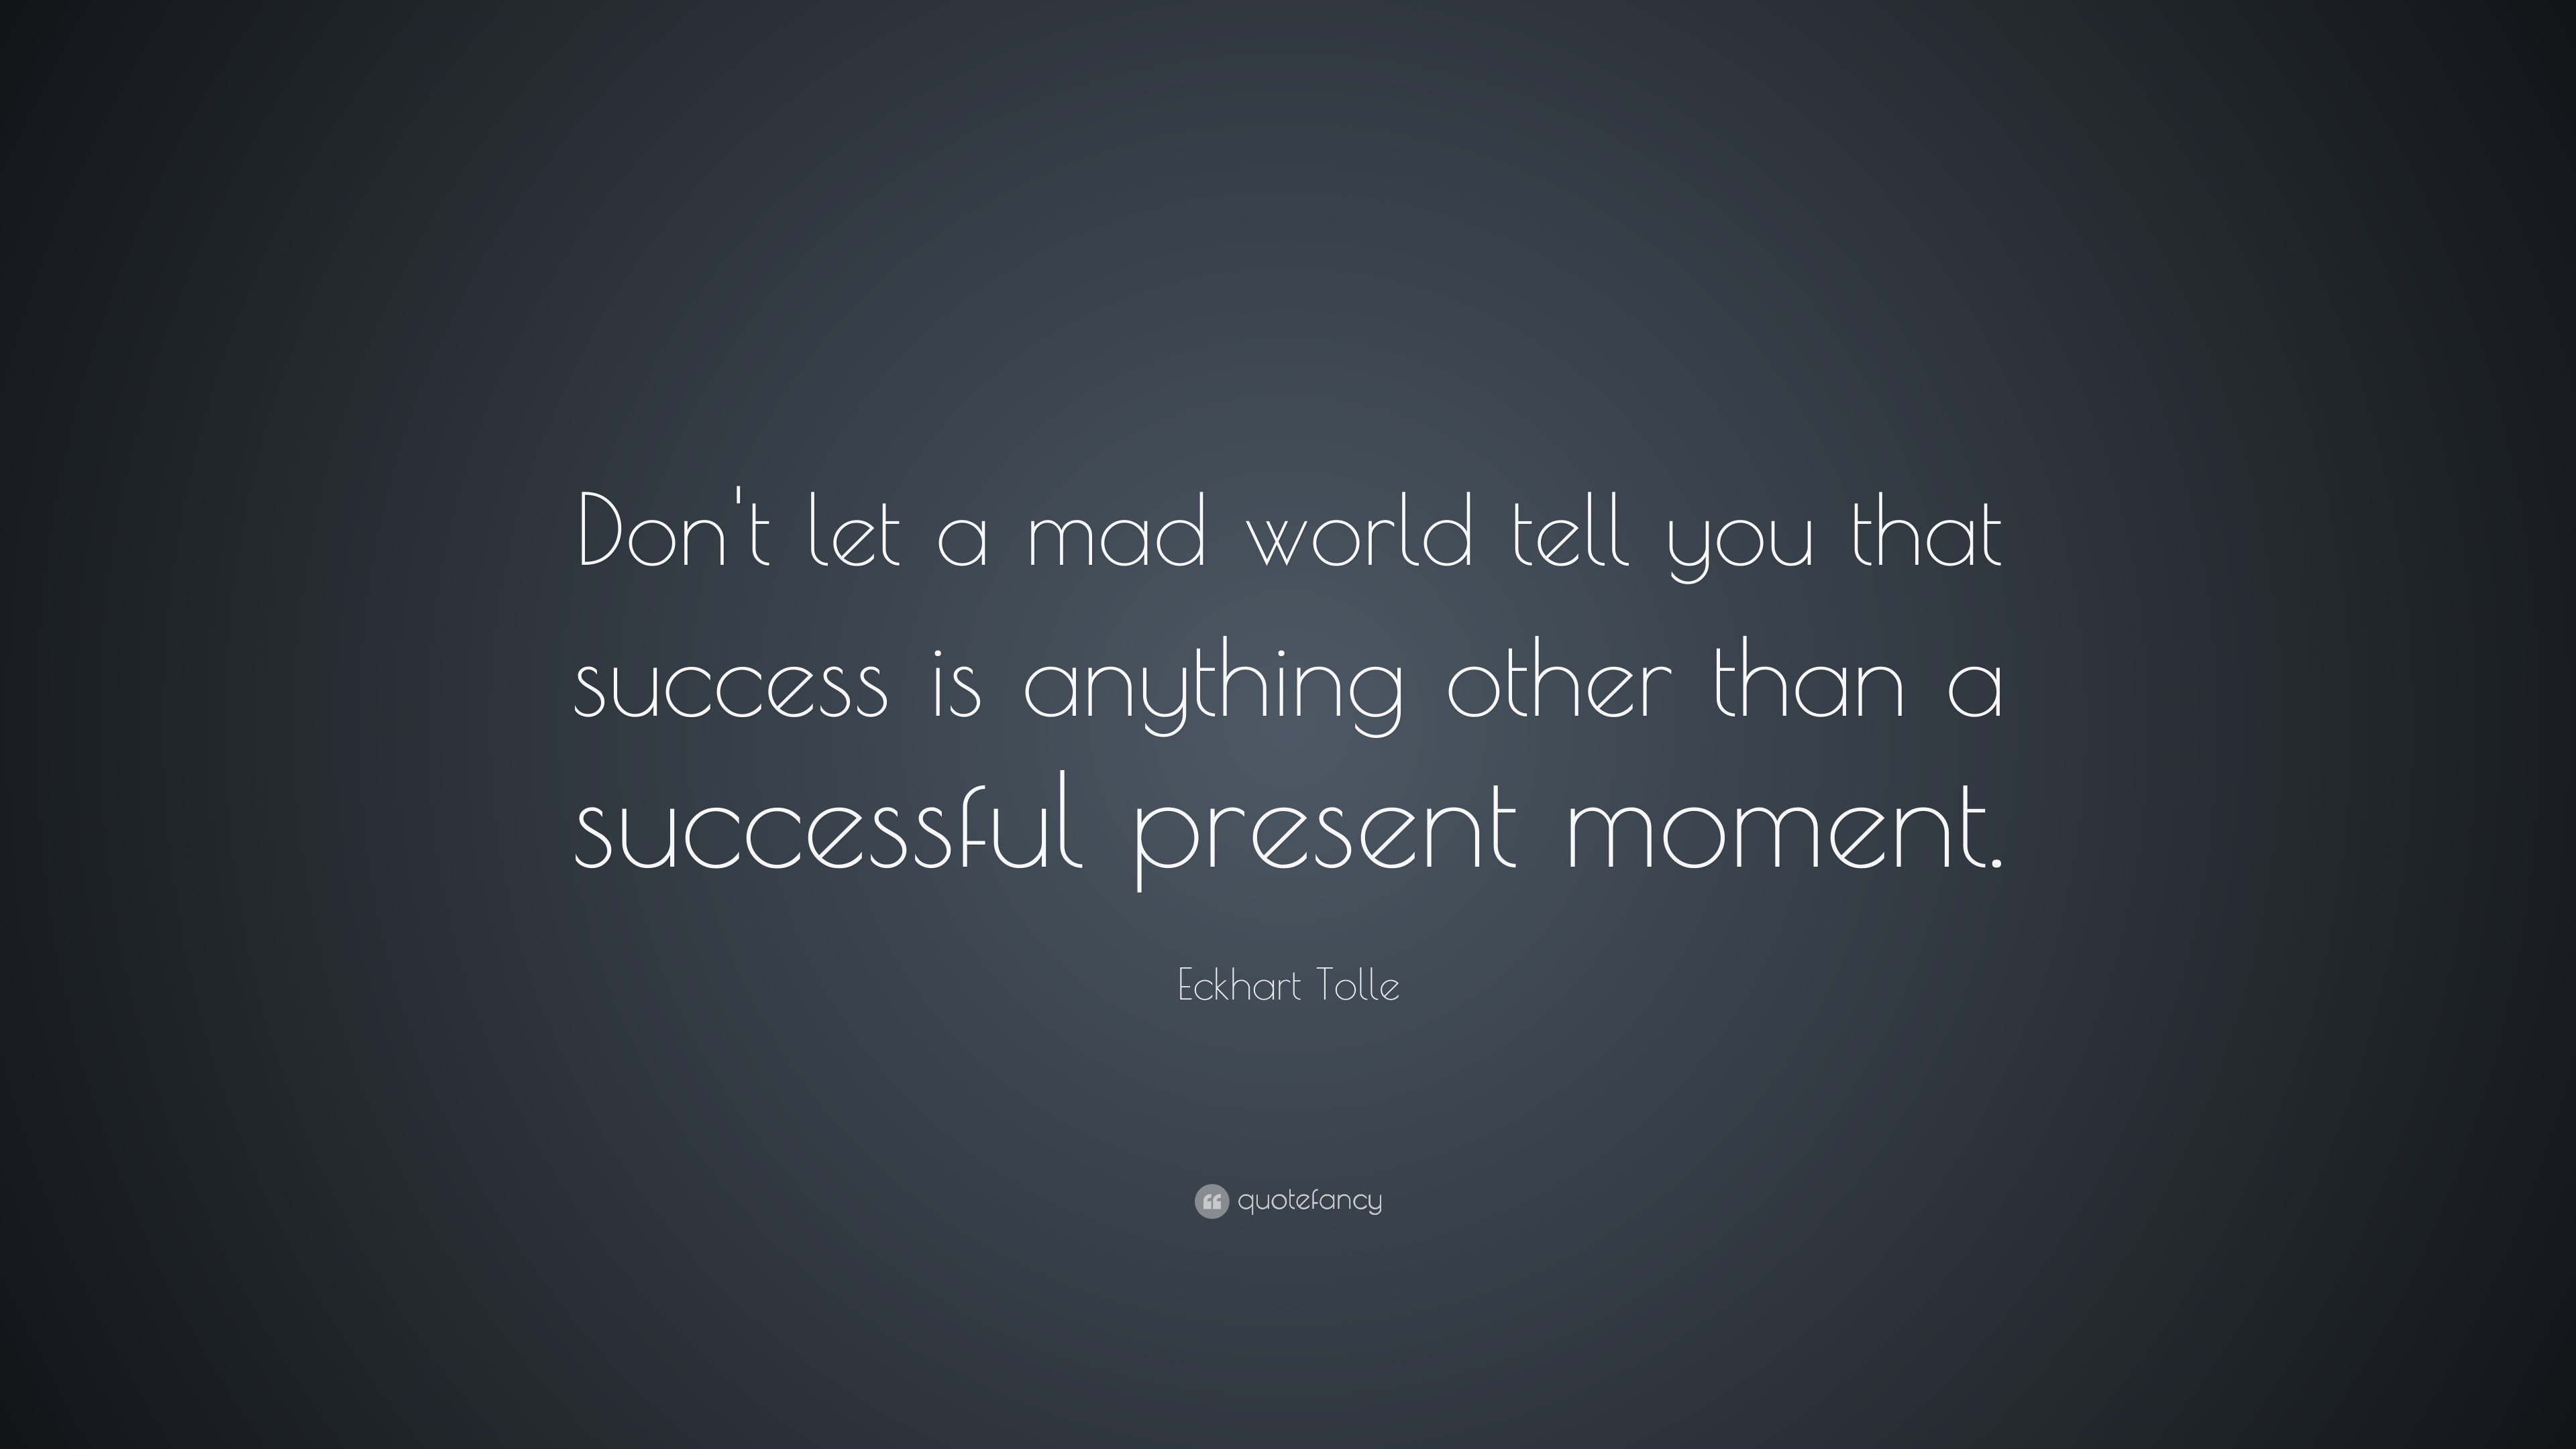 Eckhart Tolle Quote: “Don't let a mad world tell you that success is ...